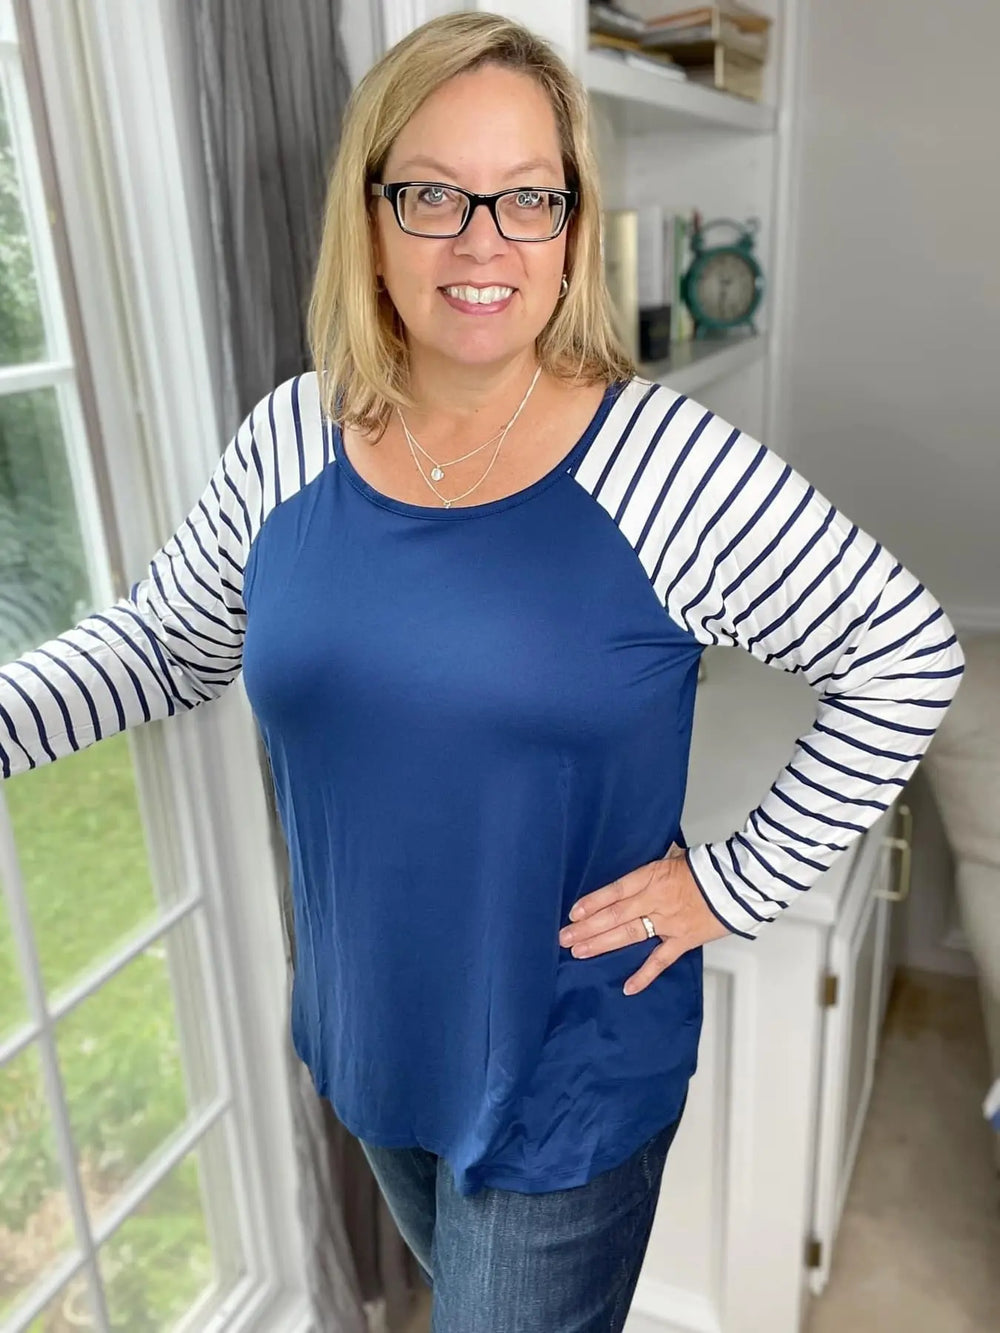 Plus Blue Striped-Sleeve Raglan Top-Styled by Steph-Styled by Steph-Women's Fashion Clothing Boutique, Indiana